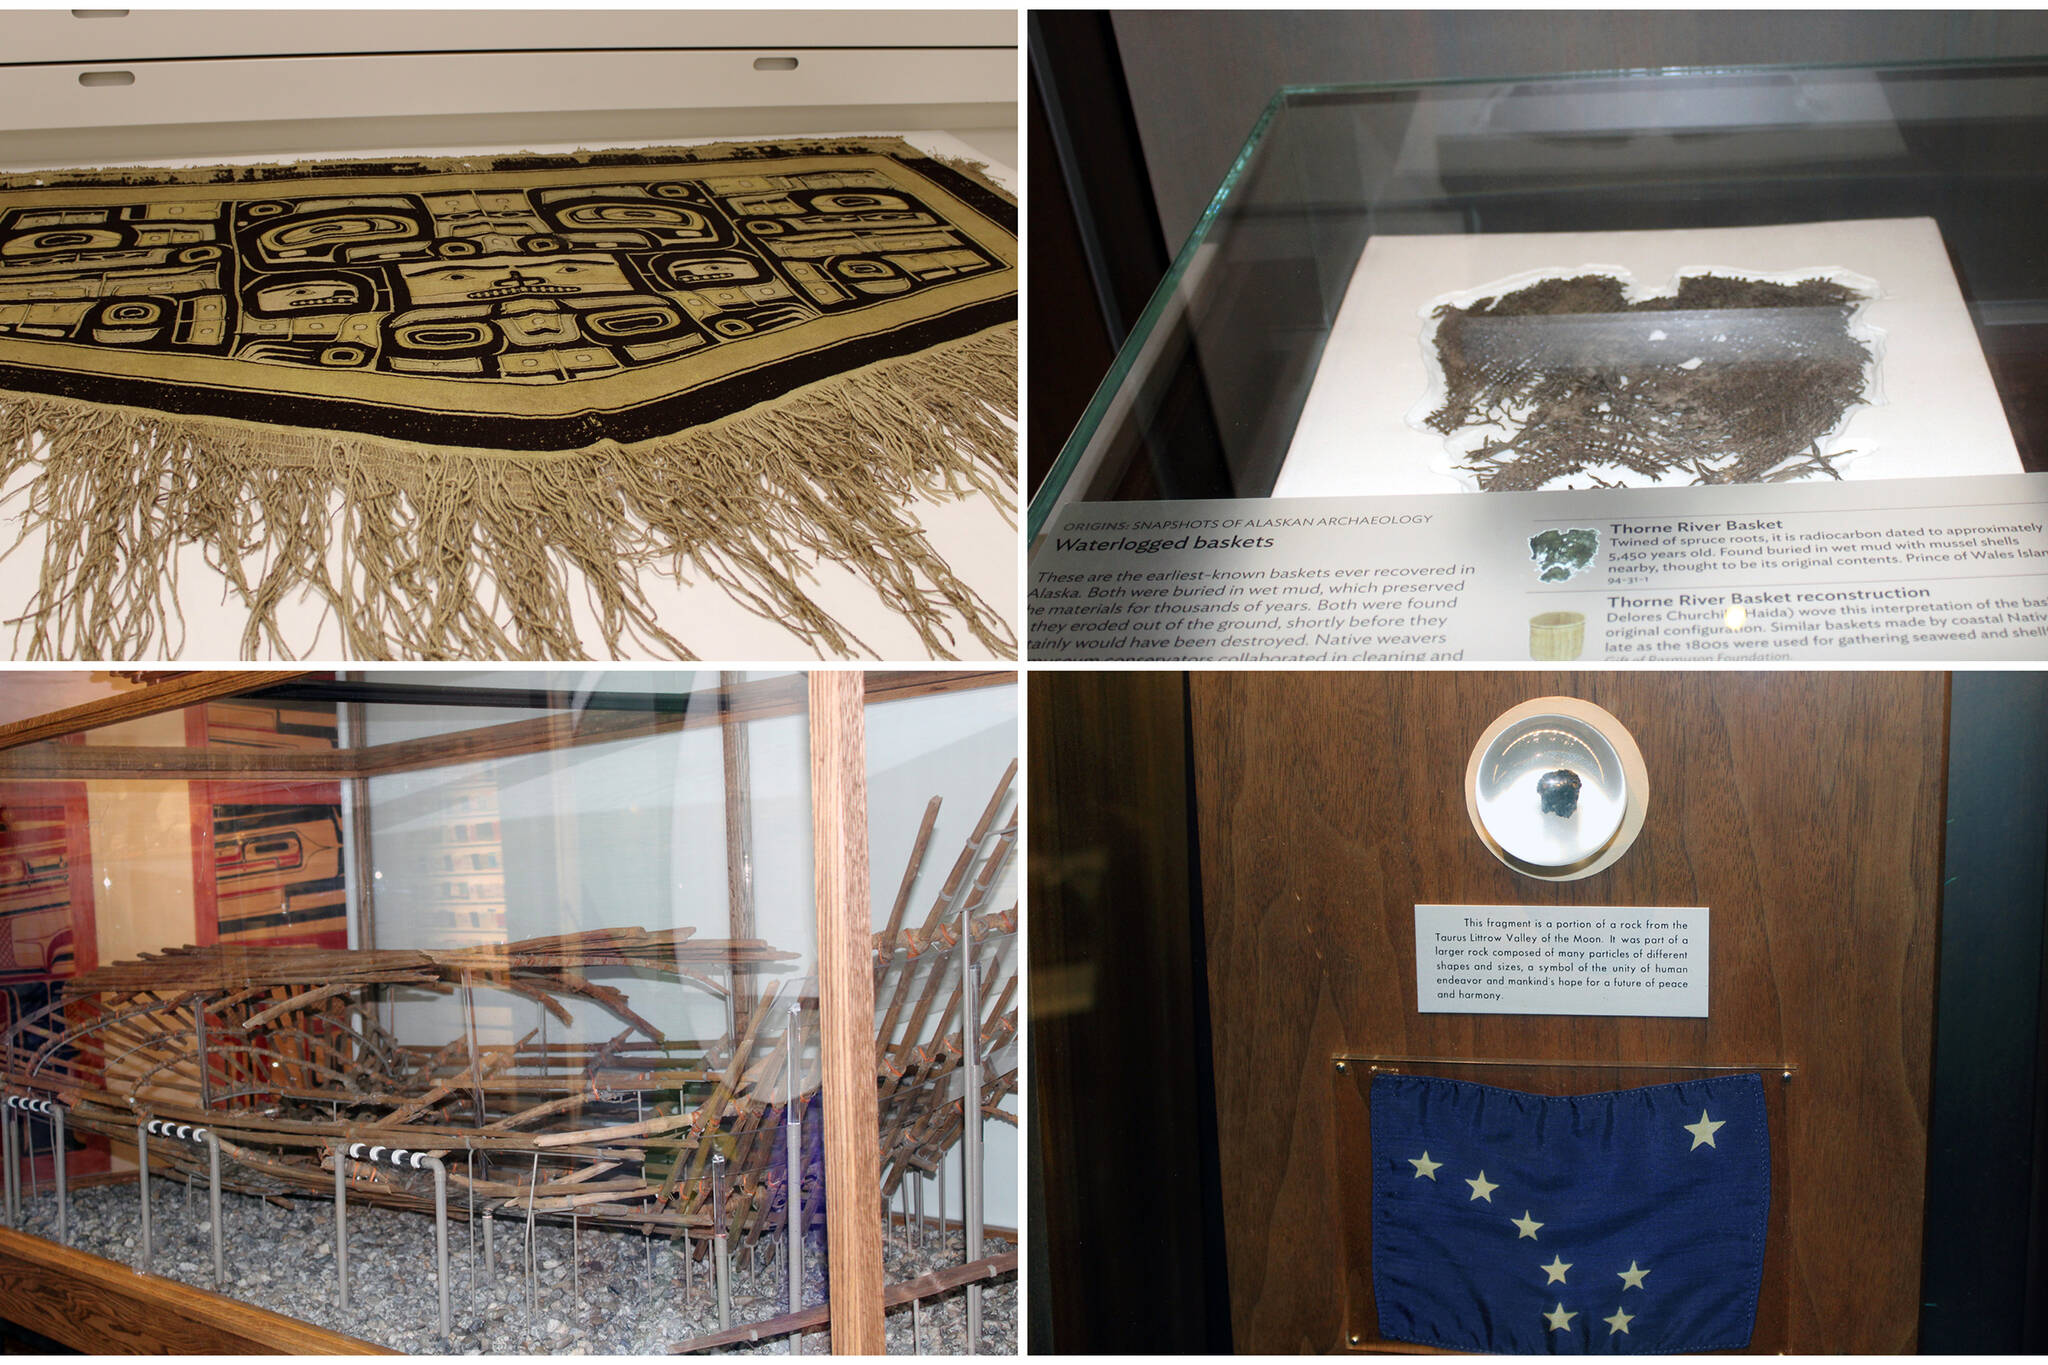 Within the City and Borough of Juneau, four museums collect objects to tell the tale of the area and its people. The Juneau Empire visited each museum to learn about some of the oldest human-made objects each has on hand. Objects include a Chilkat robe (upper left), a 5,450 year old spruce root basket (upper right), a fish trap (lower left), and a piece of moon rock (lower right). (Dana Zigmund / Juneau Empire)